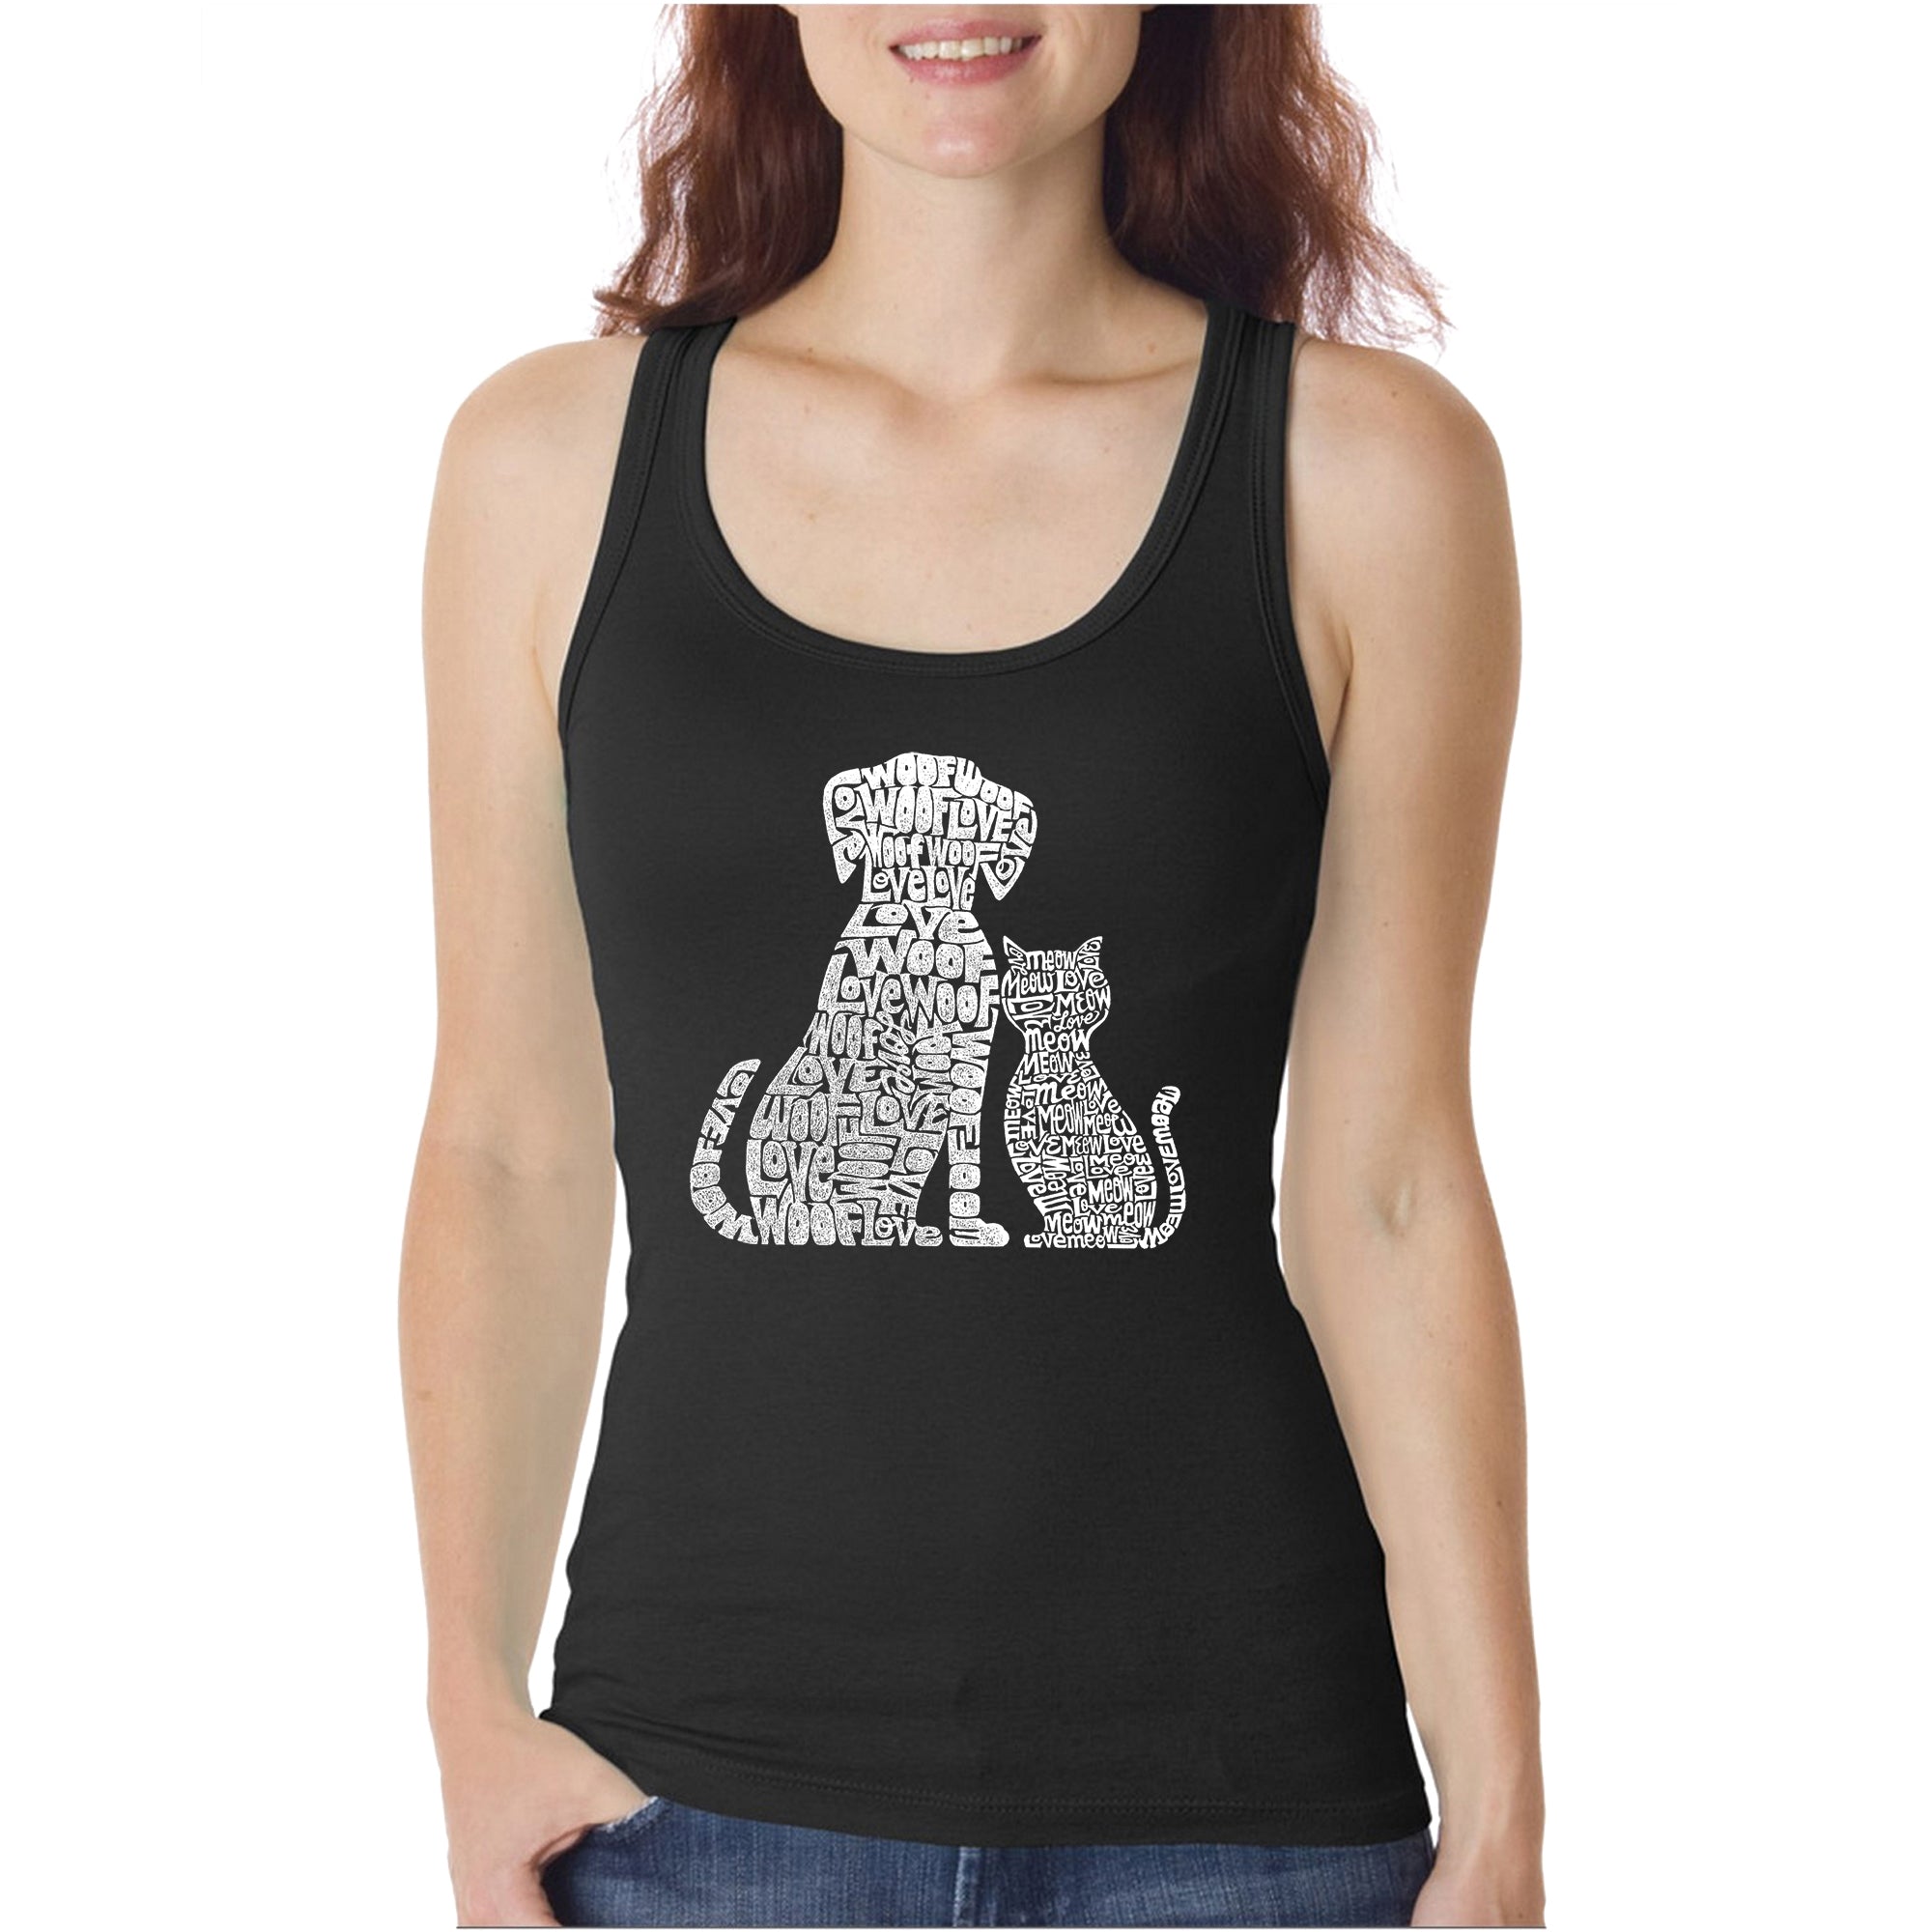 Dogs And Cats - Women's Word Art Tank Top - Small